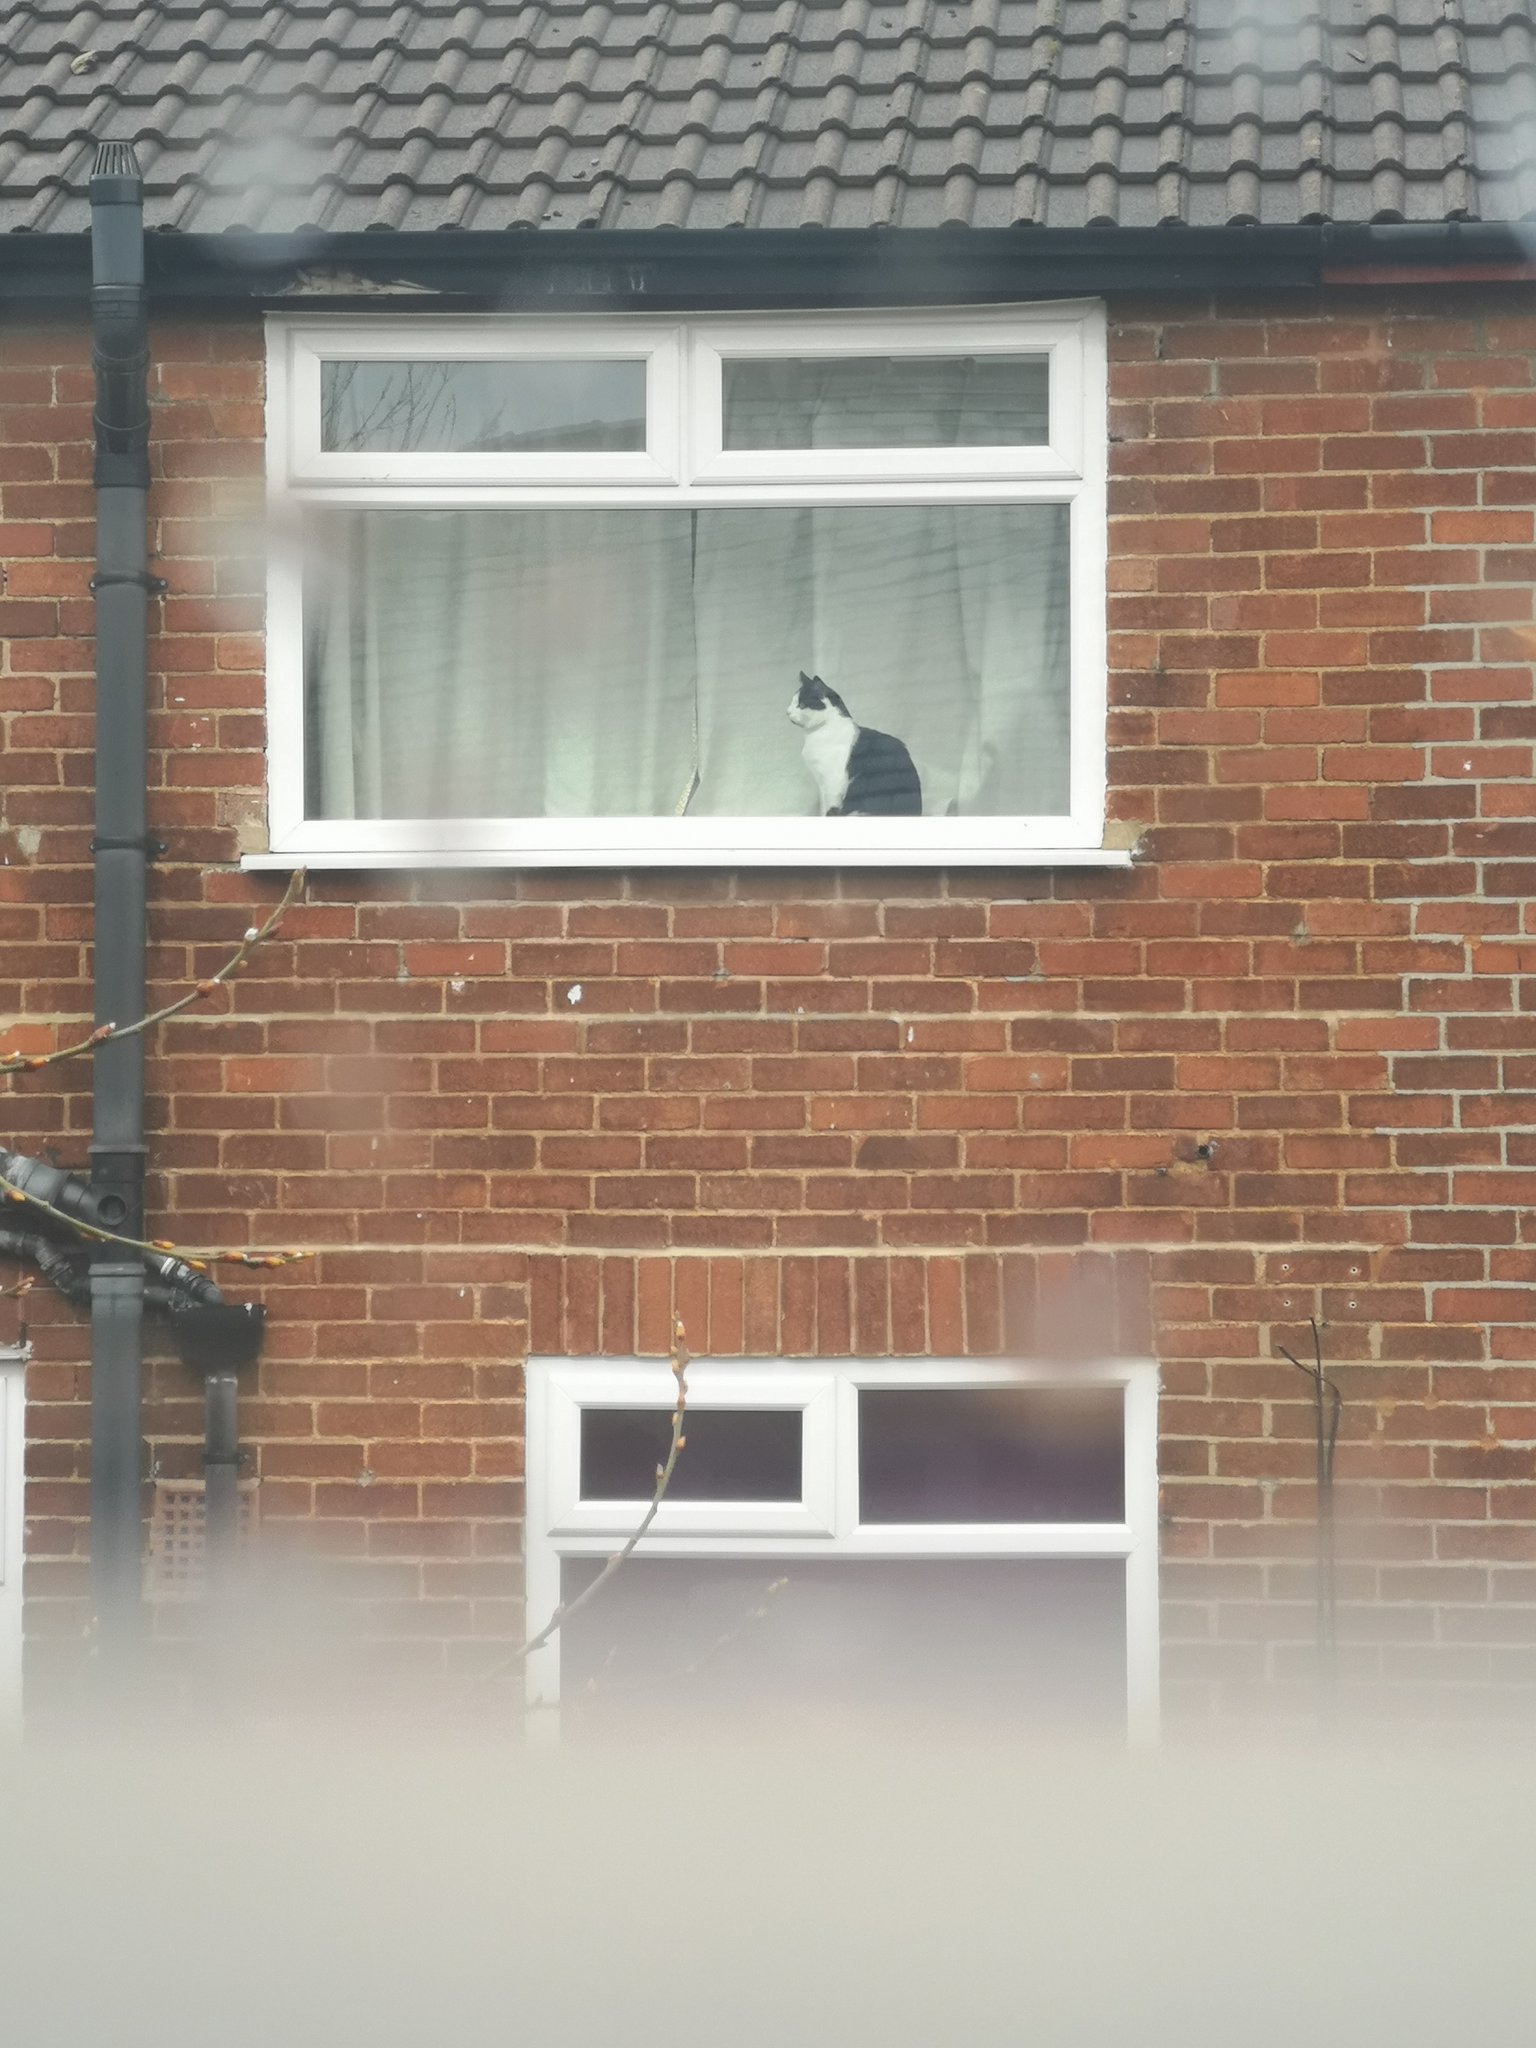 A pair of neighbours exchange information about a local cat through their windows